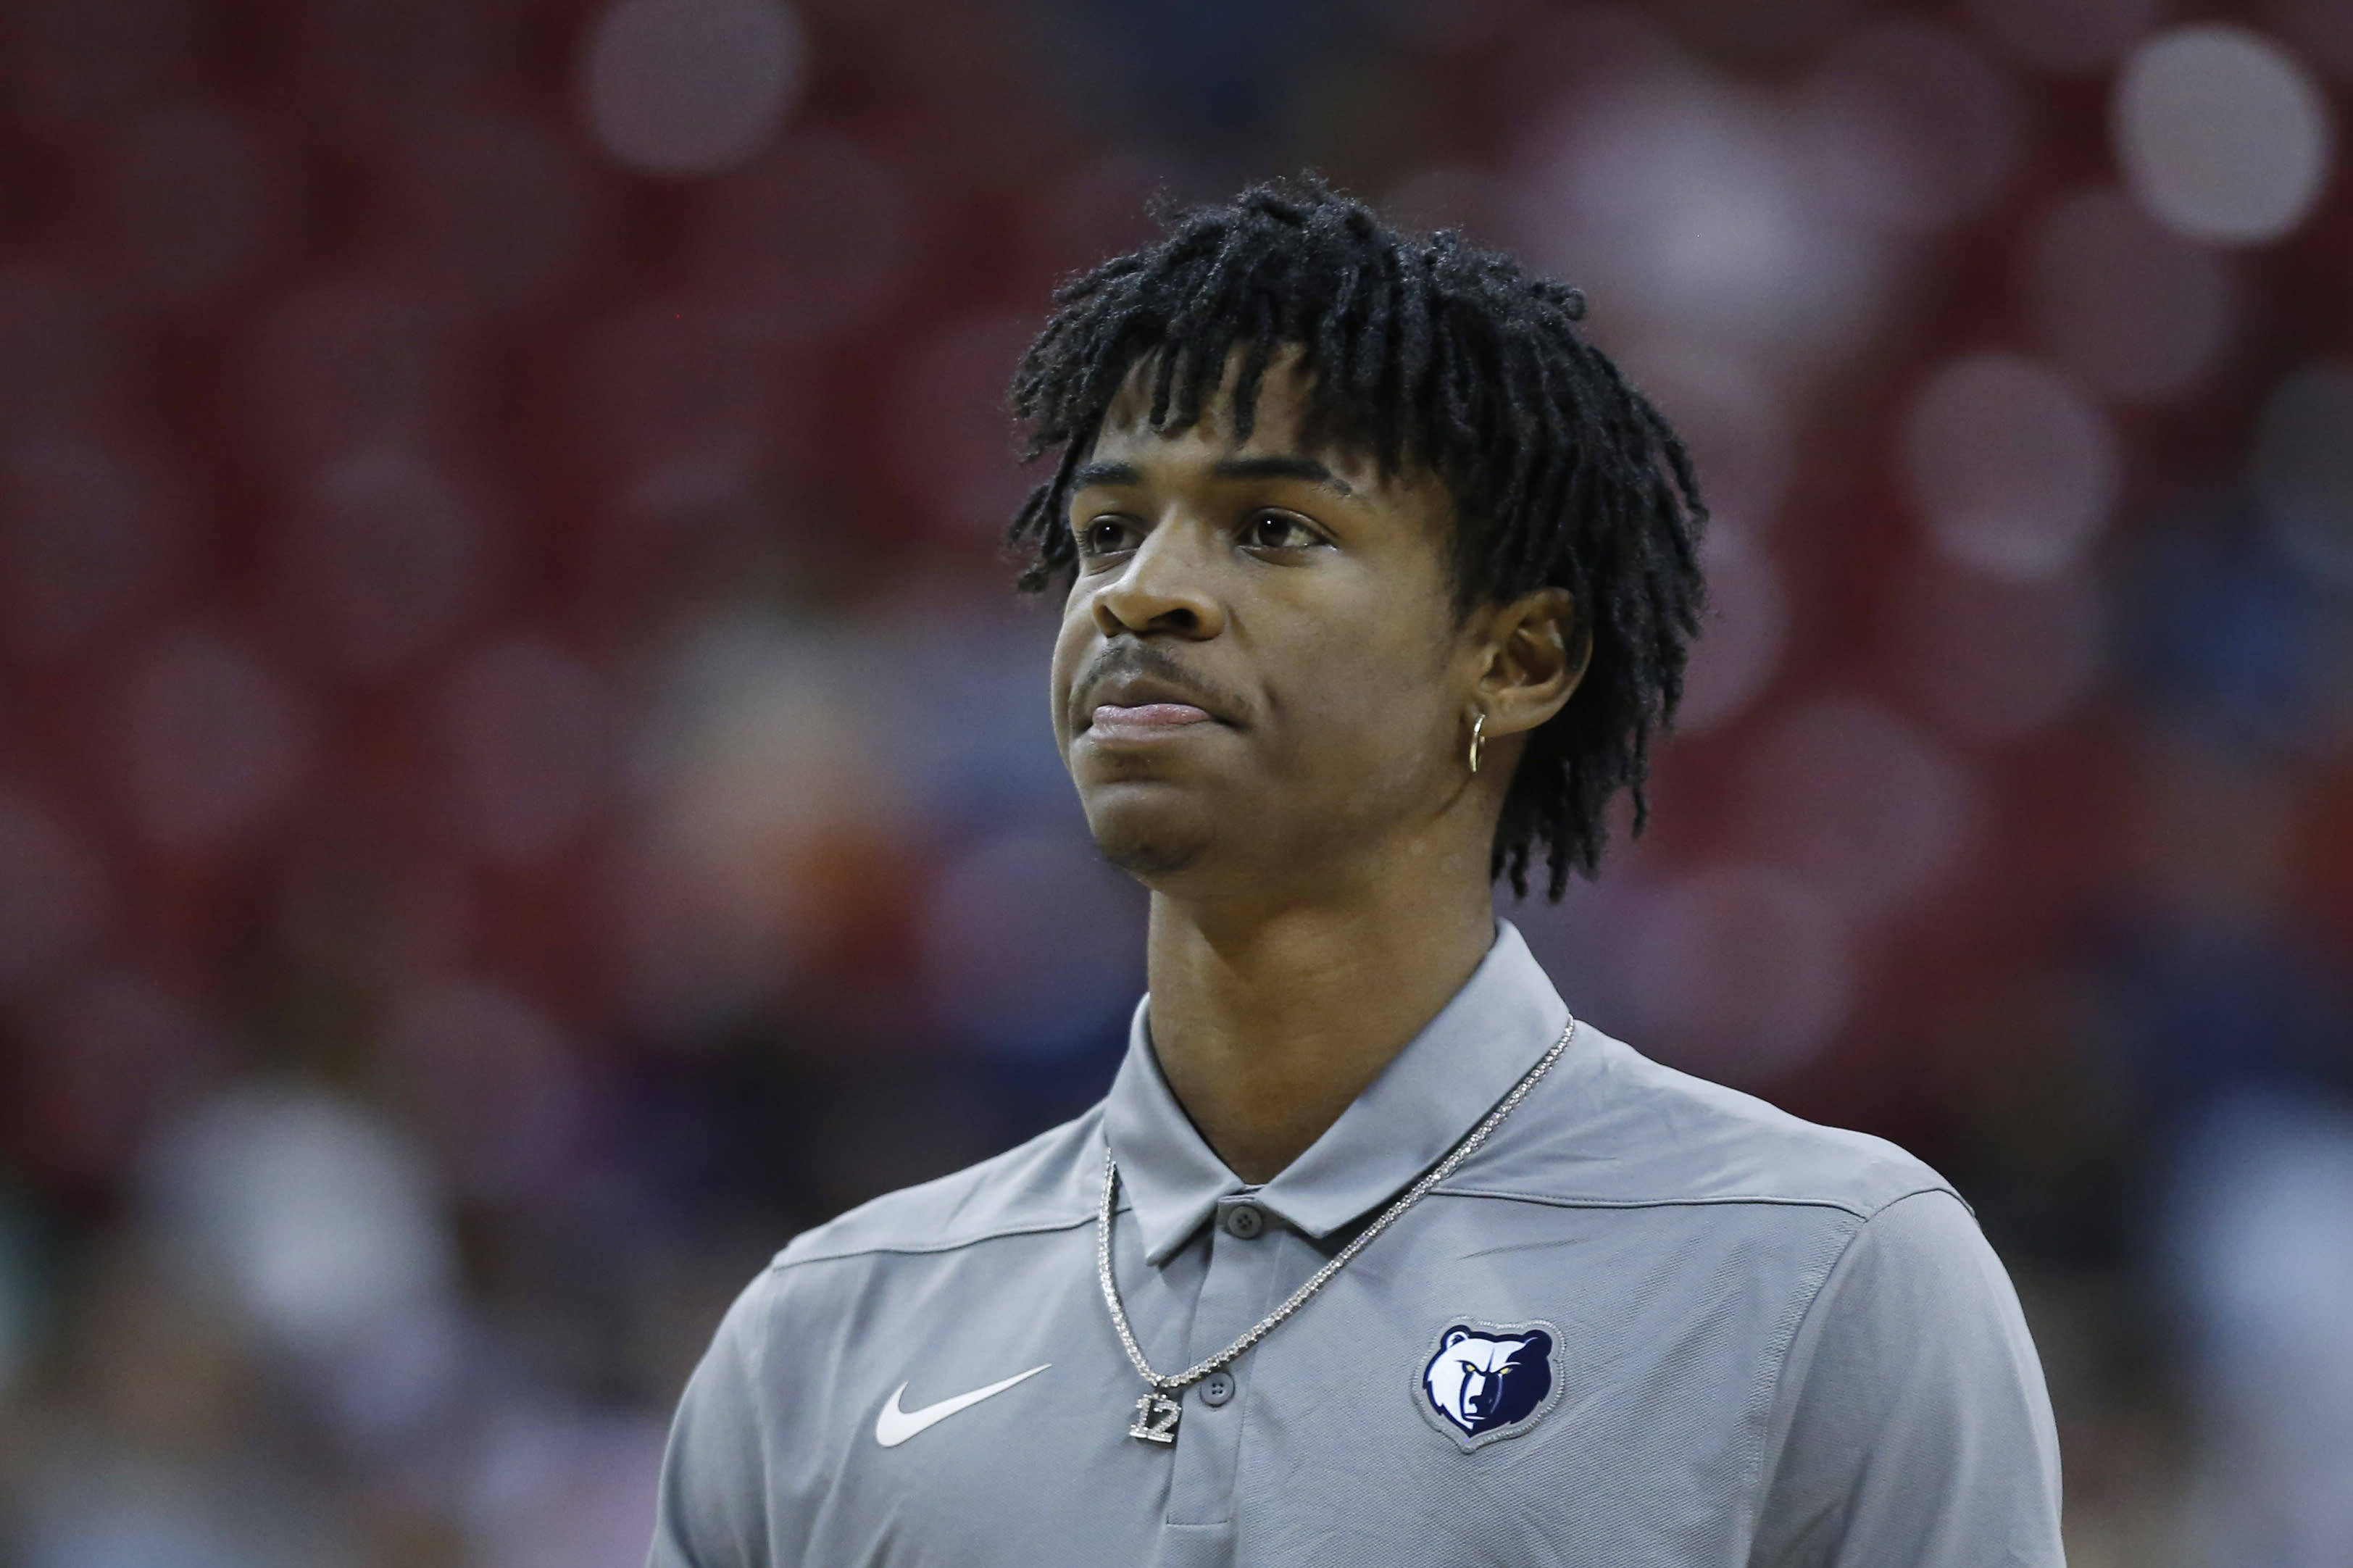 Ja Morant is here for the rumored Grizzlies throwback jerseys